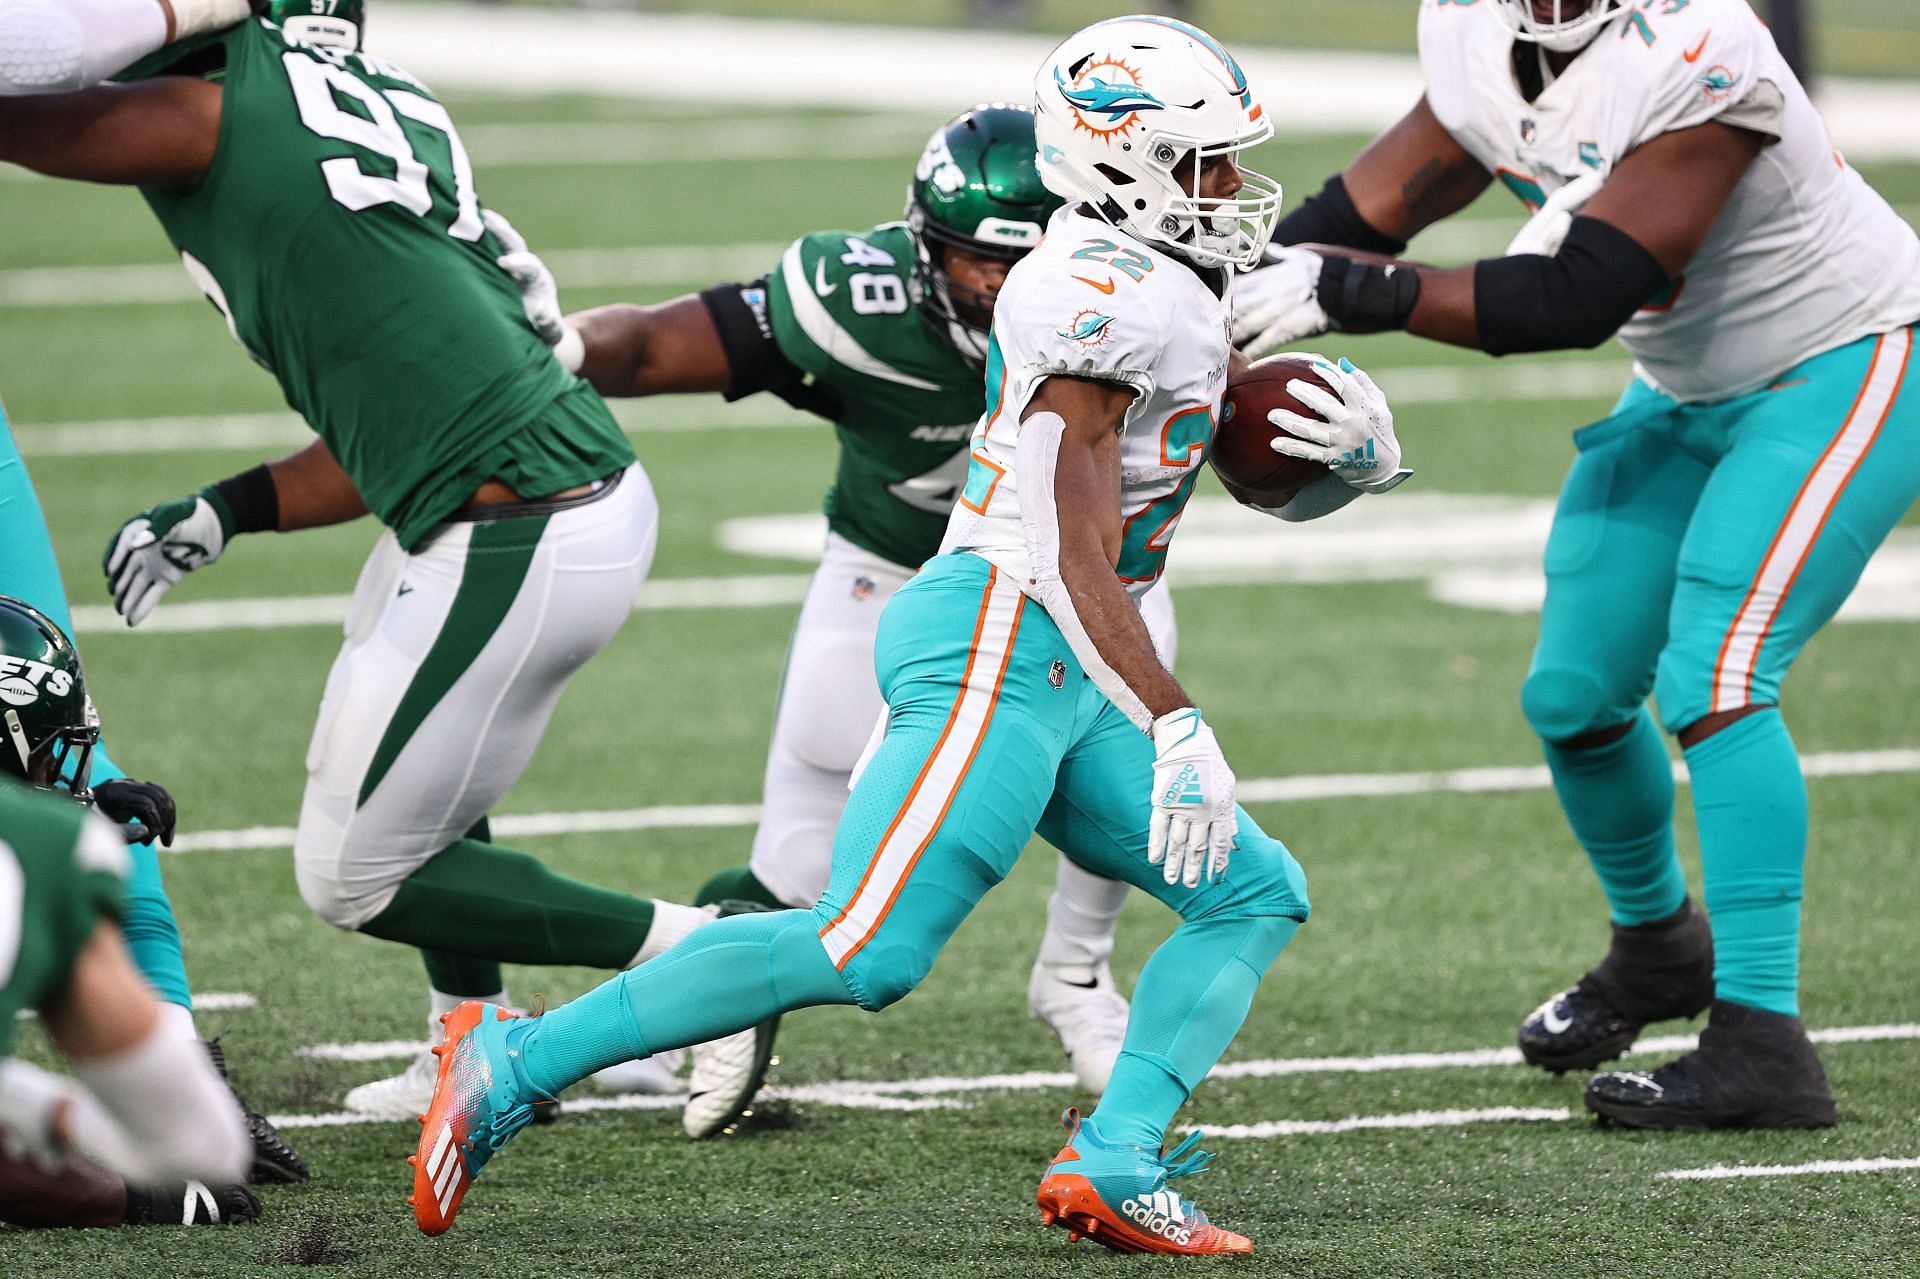 Miami Dolphins vs. New York Jets in a 2021 regular-season game